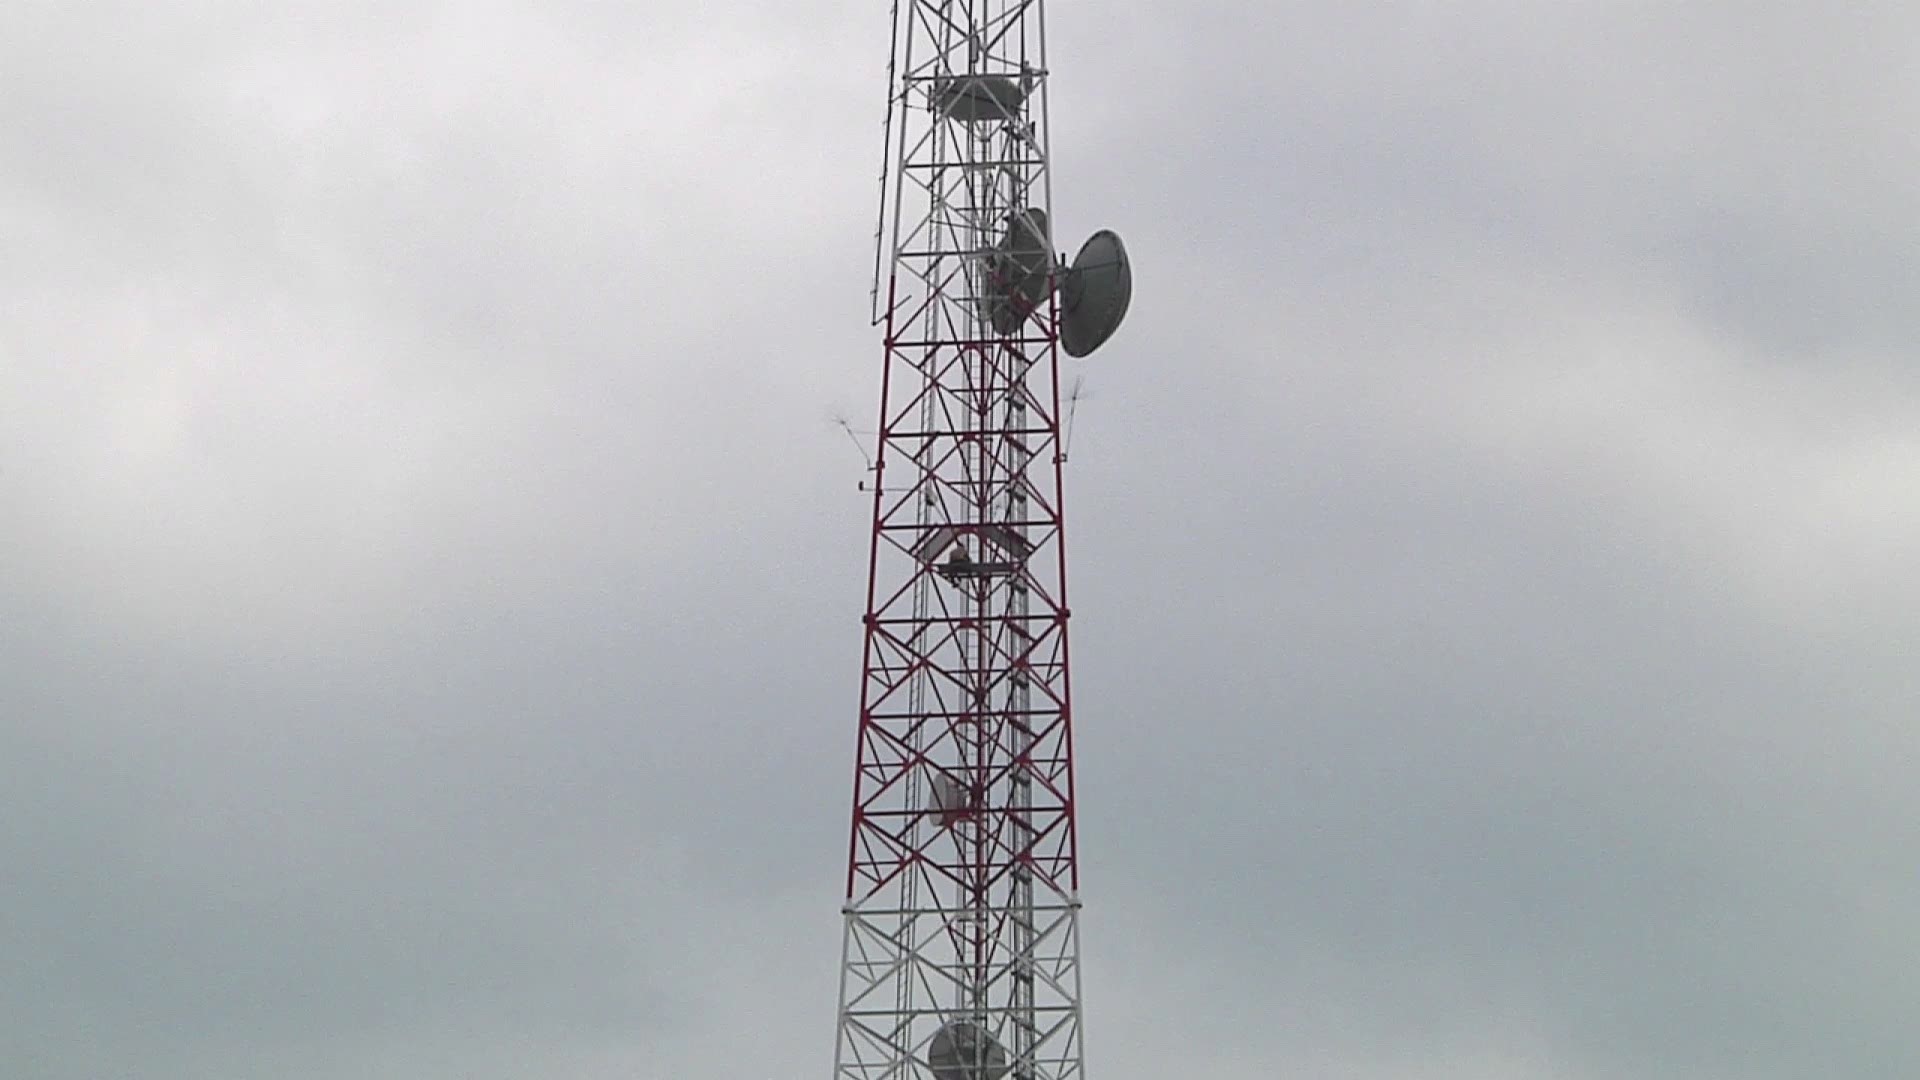 News 6 WKMG reports a man has scaled a 400-foot tower outside of its TV station in Orlando.

An anchor at the station said the man is wearing gym clothes and carrying a backpack. The station said the man climbed over a barbed-wire fence at the station before climbing the tower.